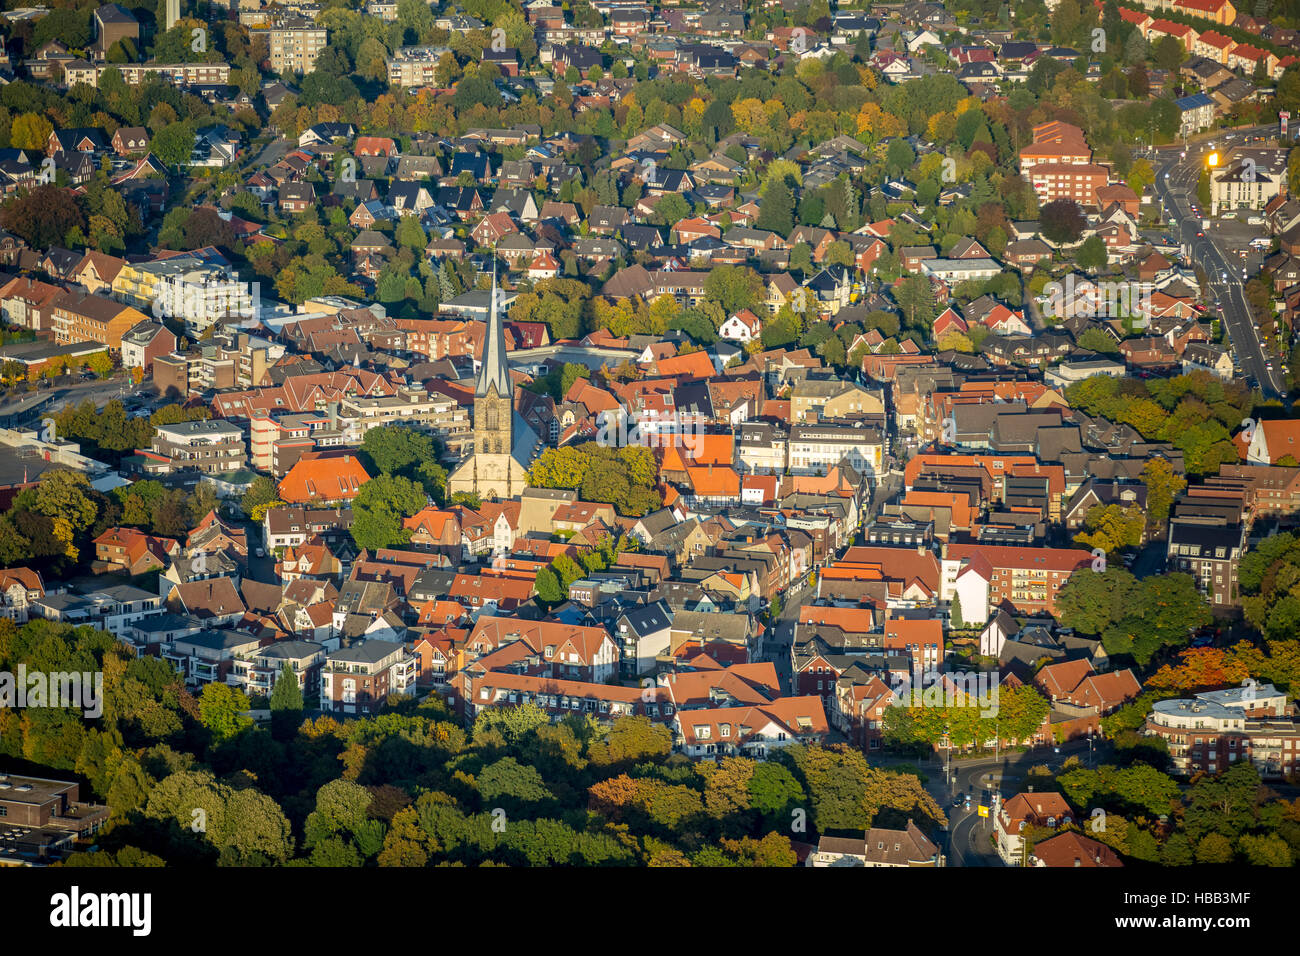 Aerial view, Old Town city center Werne, St. Christopher Church, Old Town Hall, Werne, Ruhr, north rhine-westphalia, Germany, Stock Photo